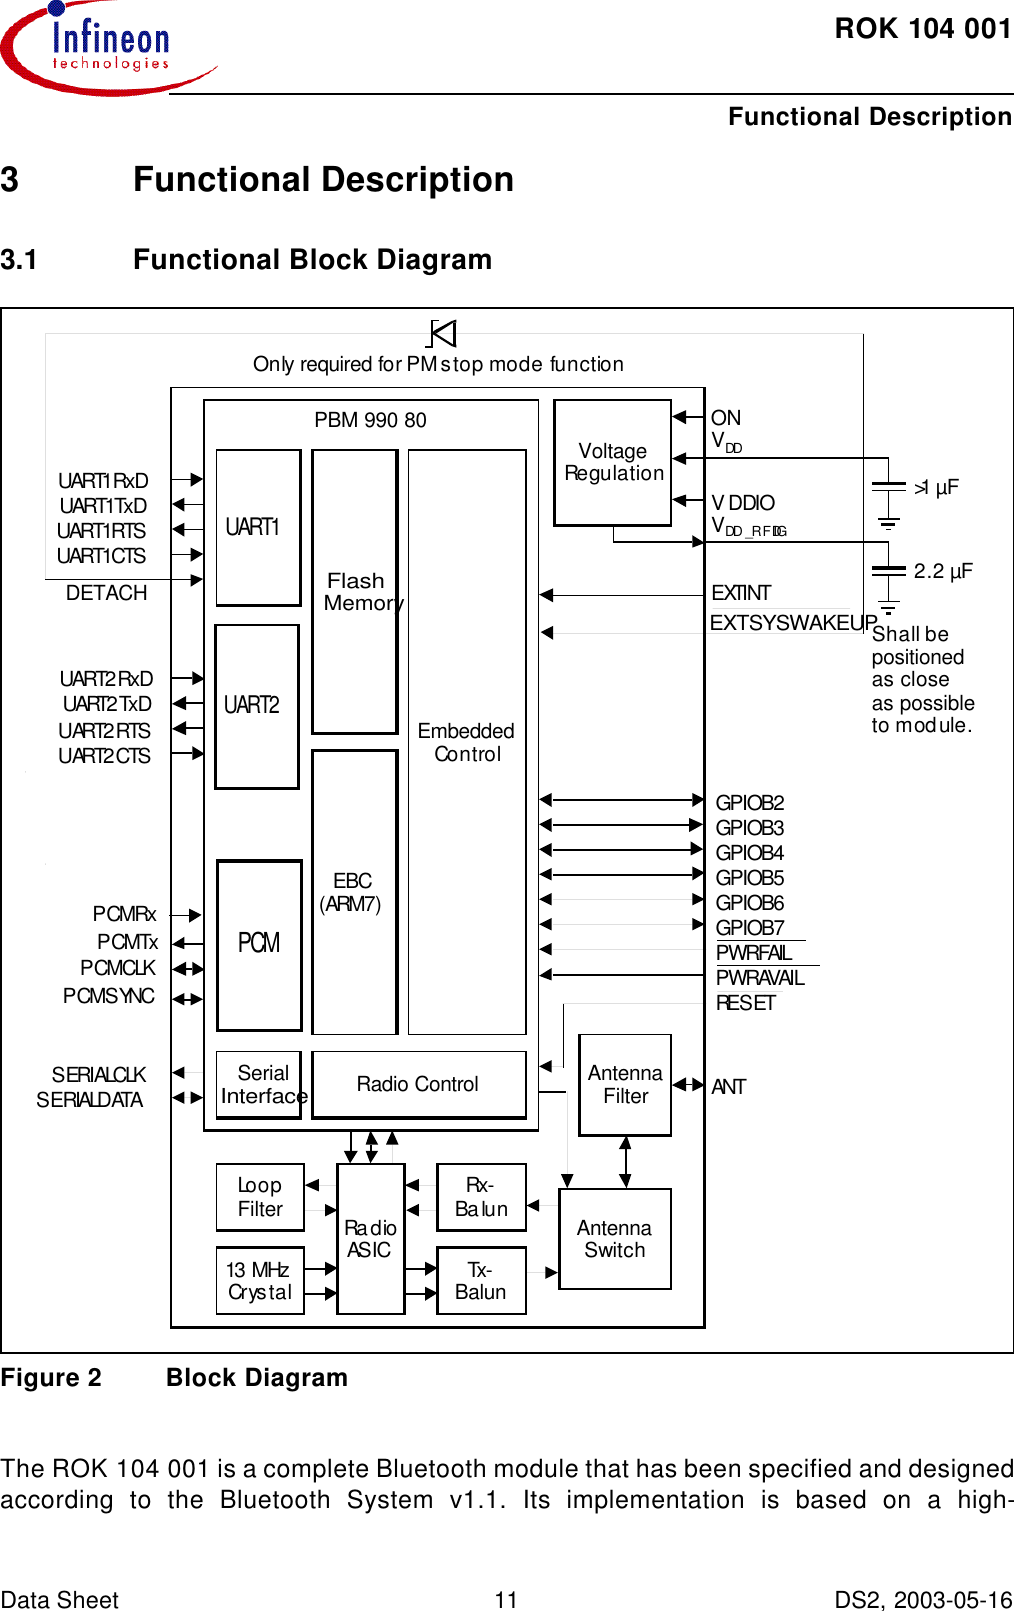 ROK104001Functional Description Data Sheet 11 DS2, 2003-05-16  3Functional Description3.1 Functional Block DiagramFigure2 Block DiagramThe ROK104001 is a complete Bluetooth module that has been specified and designedaccording to the Bluetooth System v1.1. Its implementation is based on a high-UART1UART2PCMSerialInterfaceFlashMemoryEBC(ARM7)EmbeddedControlRadio ControlPBM 990 80VoltageRegulationAntennaFilterRa dioASICLoopFilter13 MHzCrystalRx-BalunTx-BalunAntennaSwitchUART1RxDUART1TxDUART1RTSUART1CTSUART2RxDUART2TxDUART2RTSUART2CTSPCMRxPCMTxPCMCLKPCMSYNCSERIALCLKSERIALDATAONVDDVDDIOVDD _RFDIGEXTINTEXTSYSWAKEUPGPIOB2GPIOB3GPIOB4GPIOB5GPIOB6GPIOB7PWRFAILPWRAVAILRESETANT&gt;1µF2.2µFShall bepositionedas closeas possibletomodule.Only required forPMstop mode functionDETACH